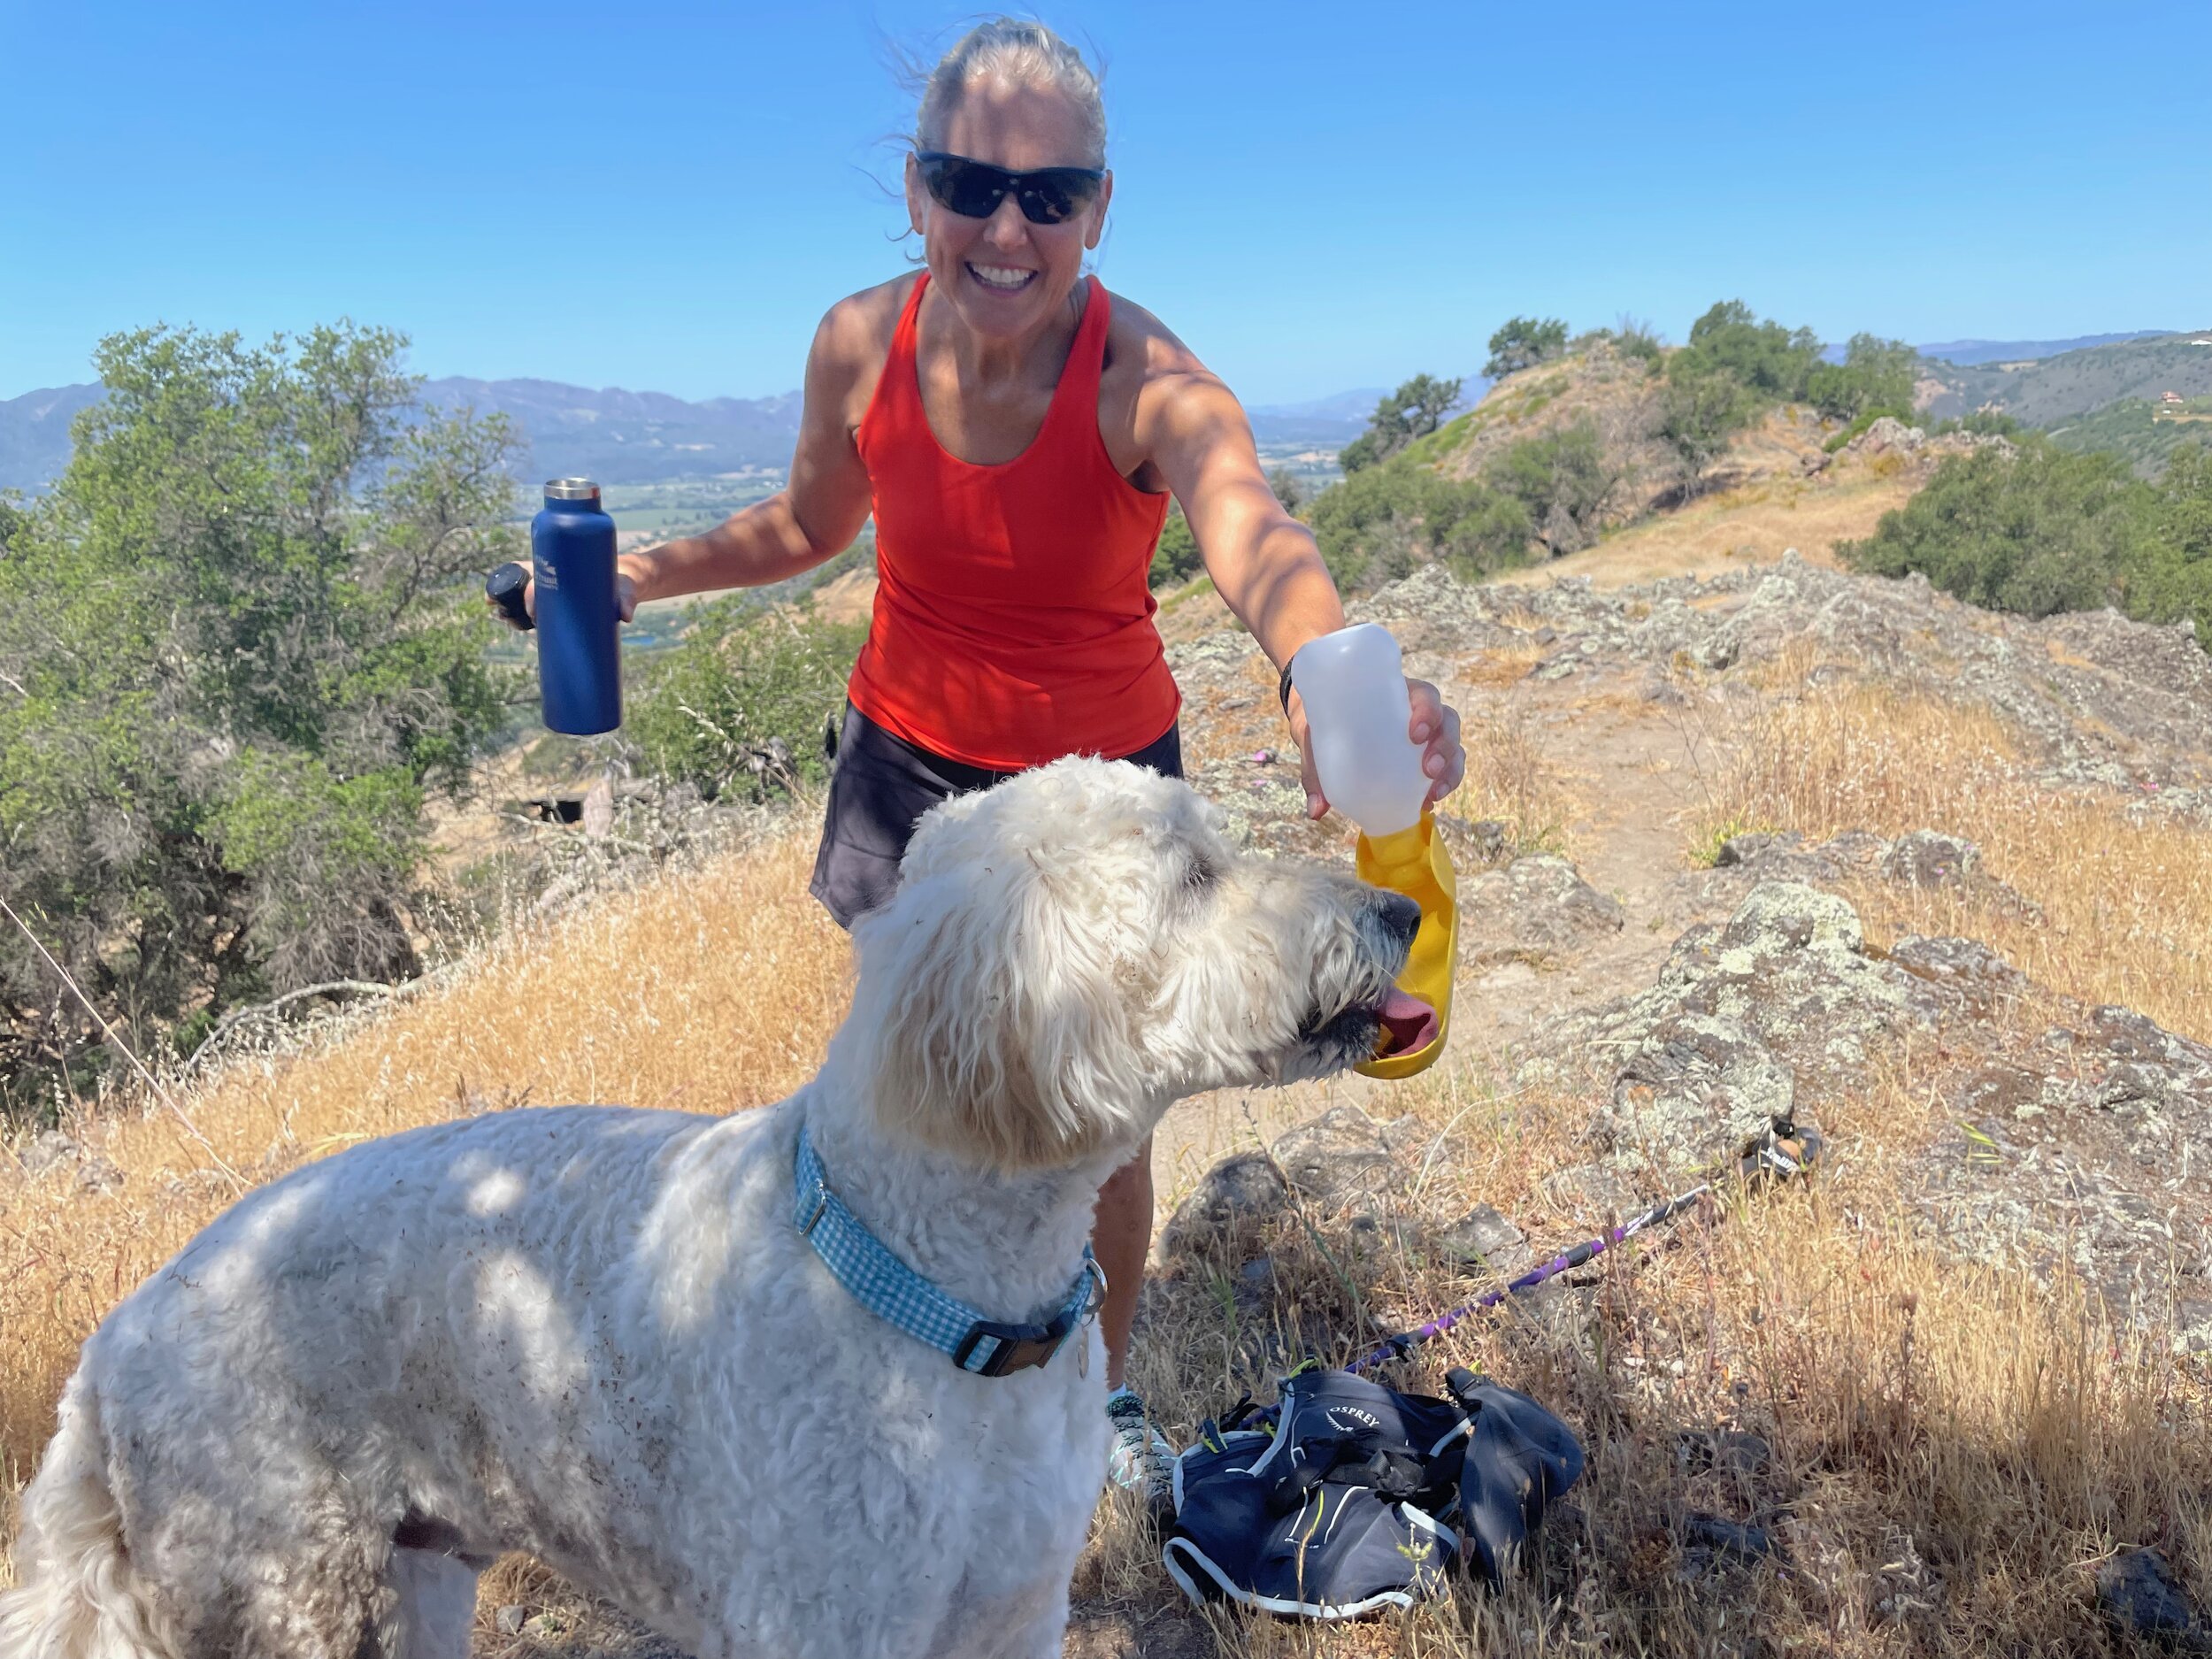 Adventurous dogs will enjoy, but bring water!